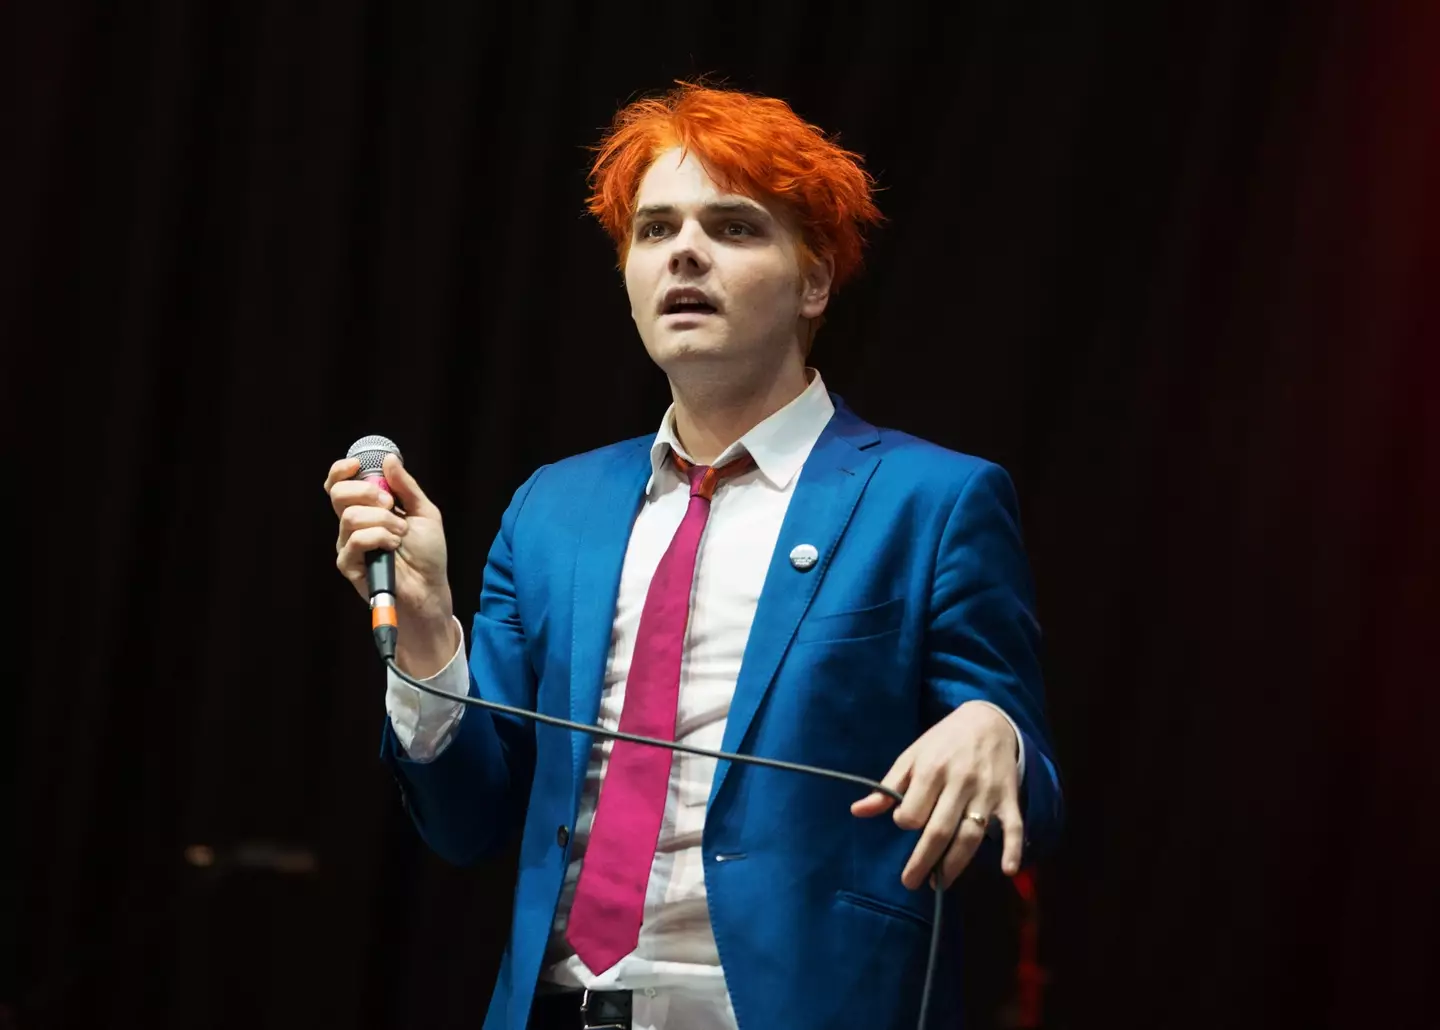 Gerard Way said 9/11 'one of the biggest reasons' why he started My Chemical Romance.